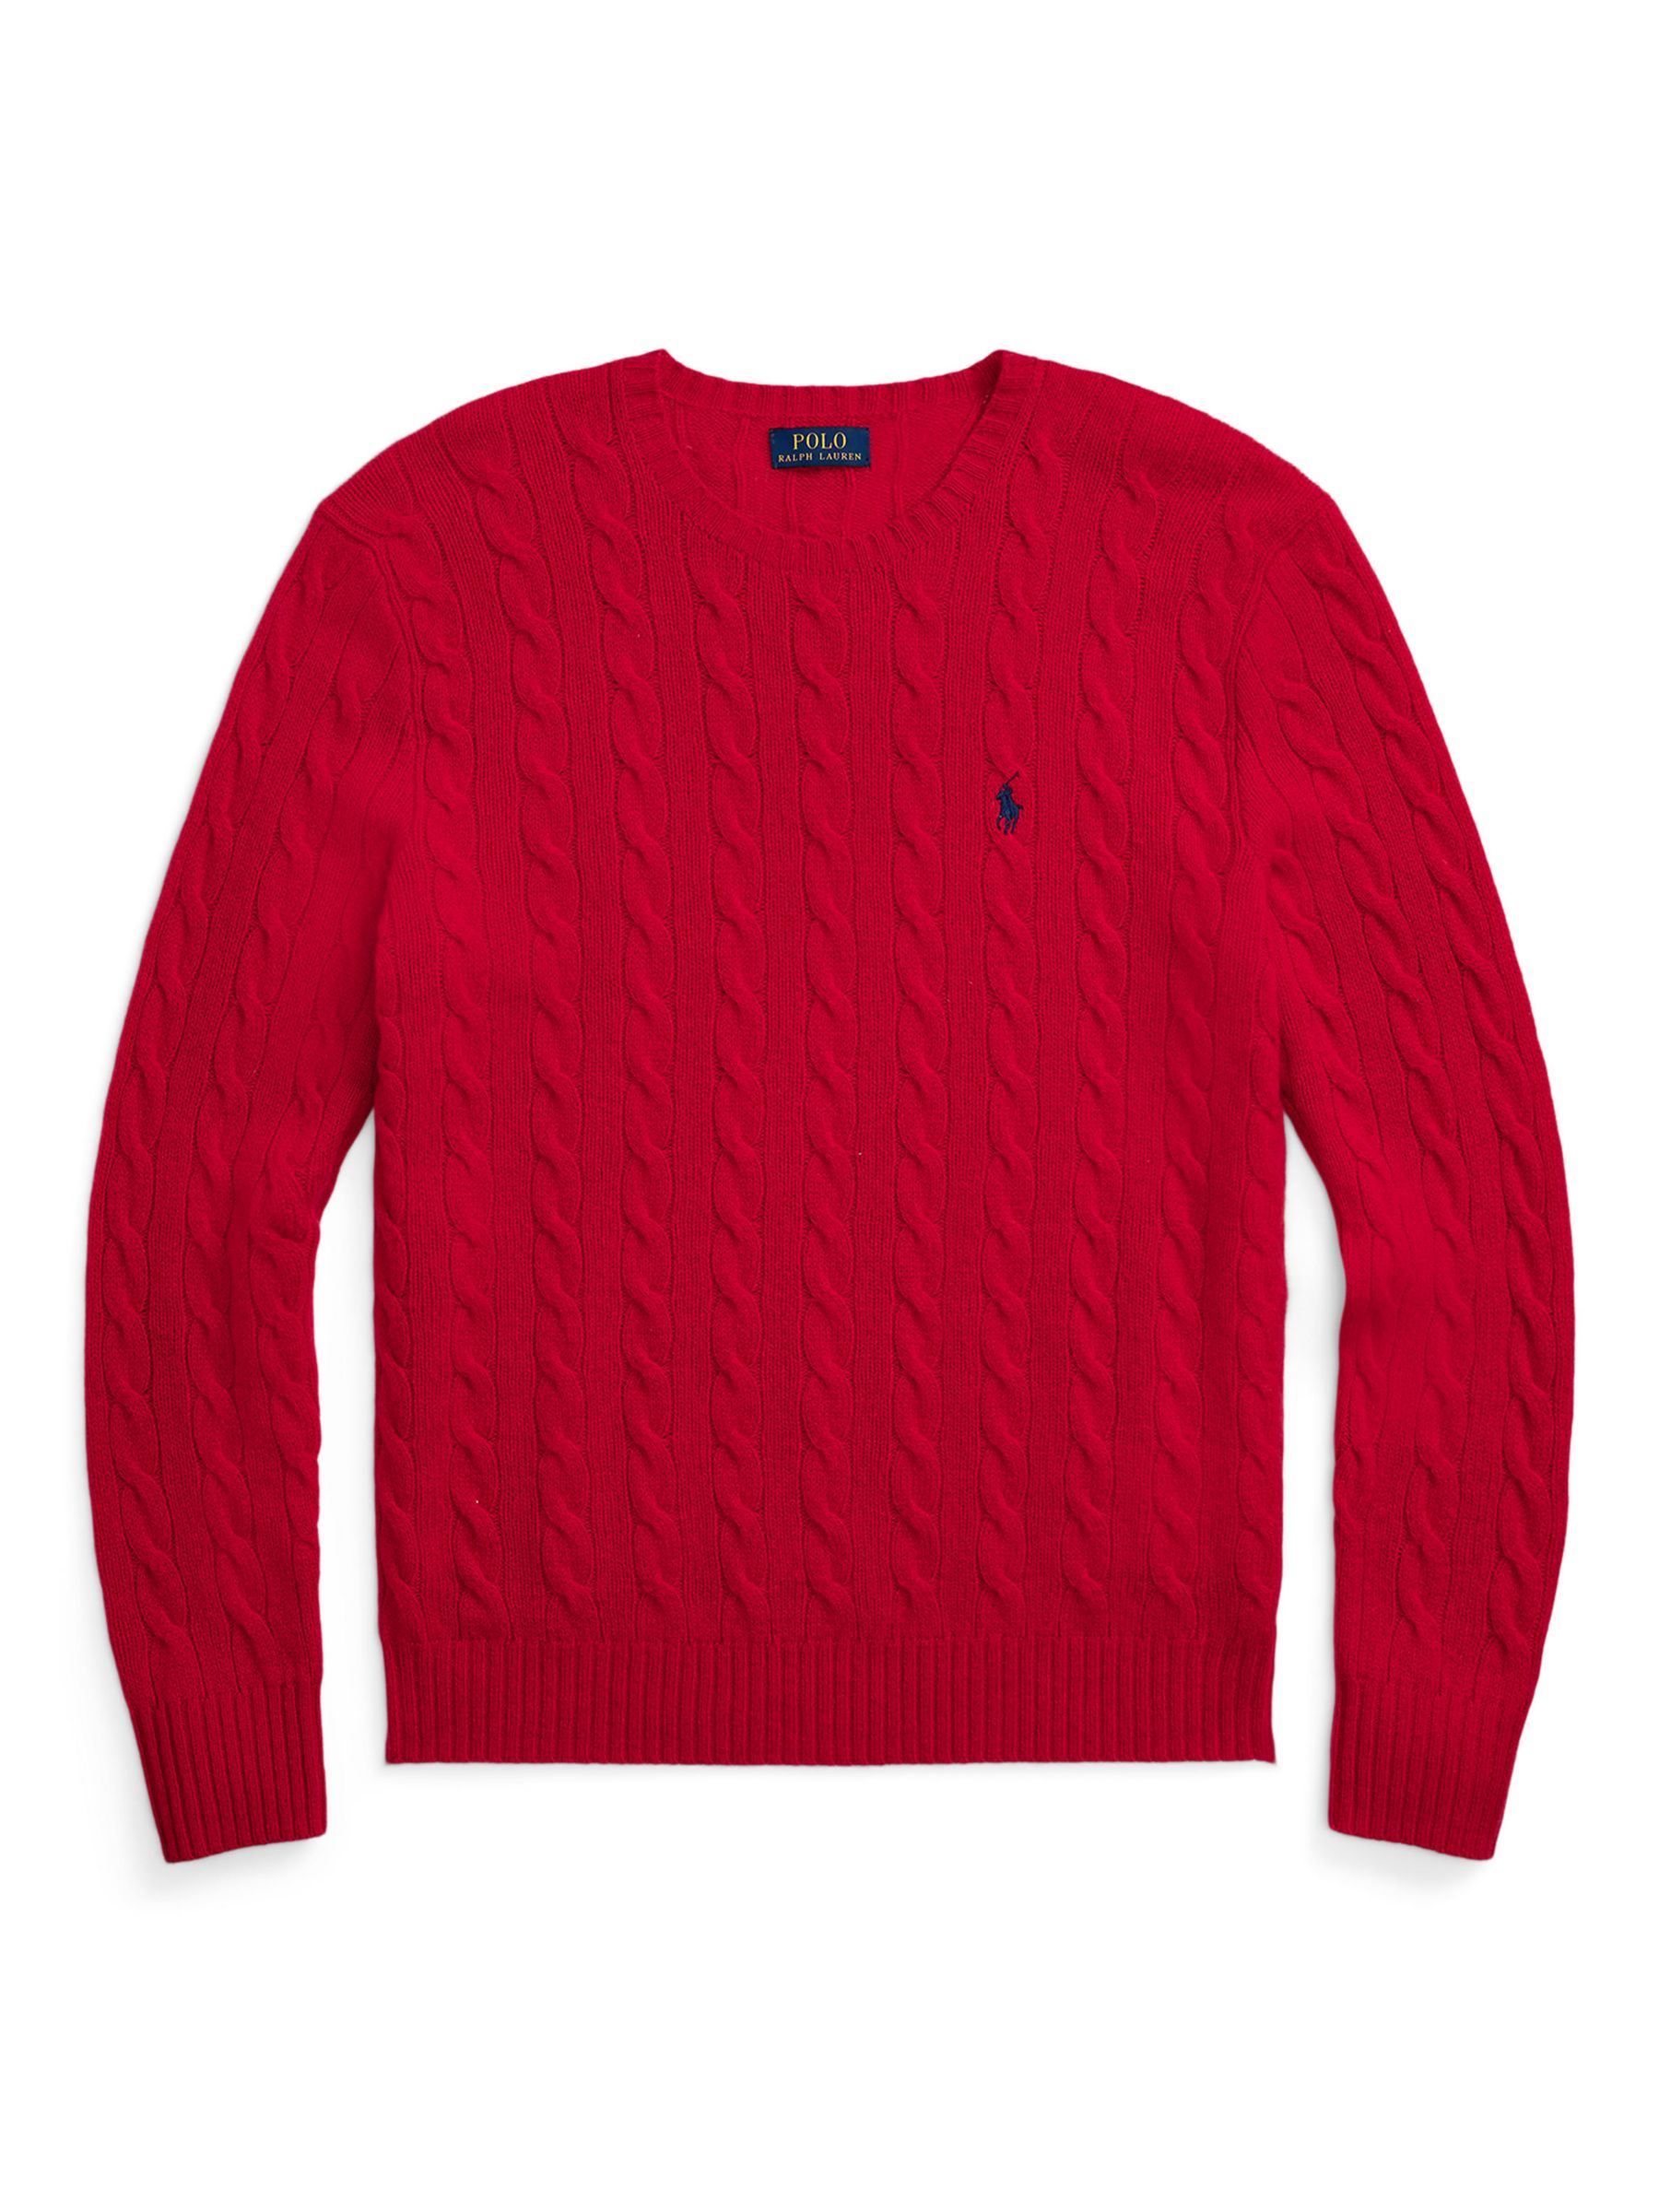 Polo Ralph Lauren Iconic Cable Knit Jumper, Red